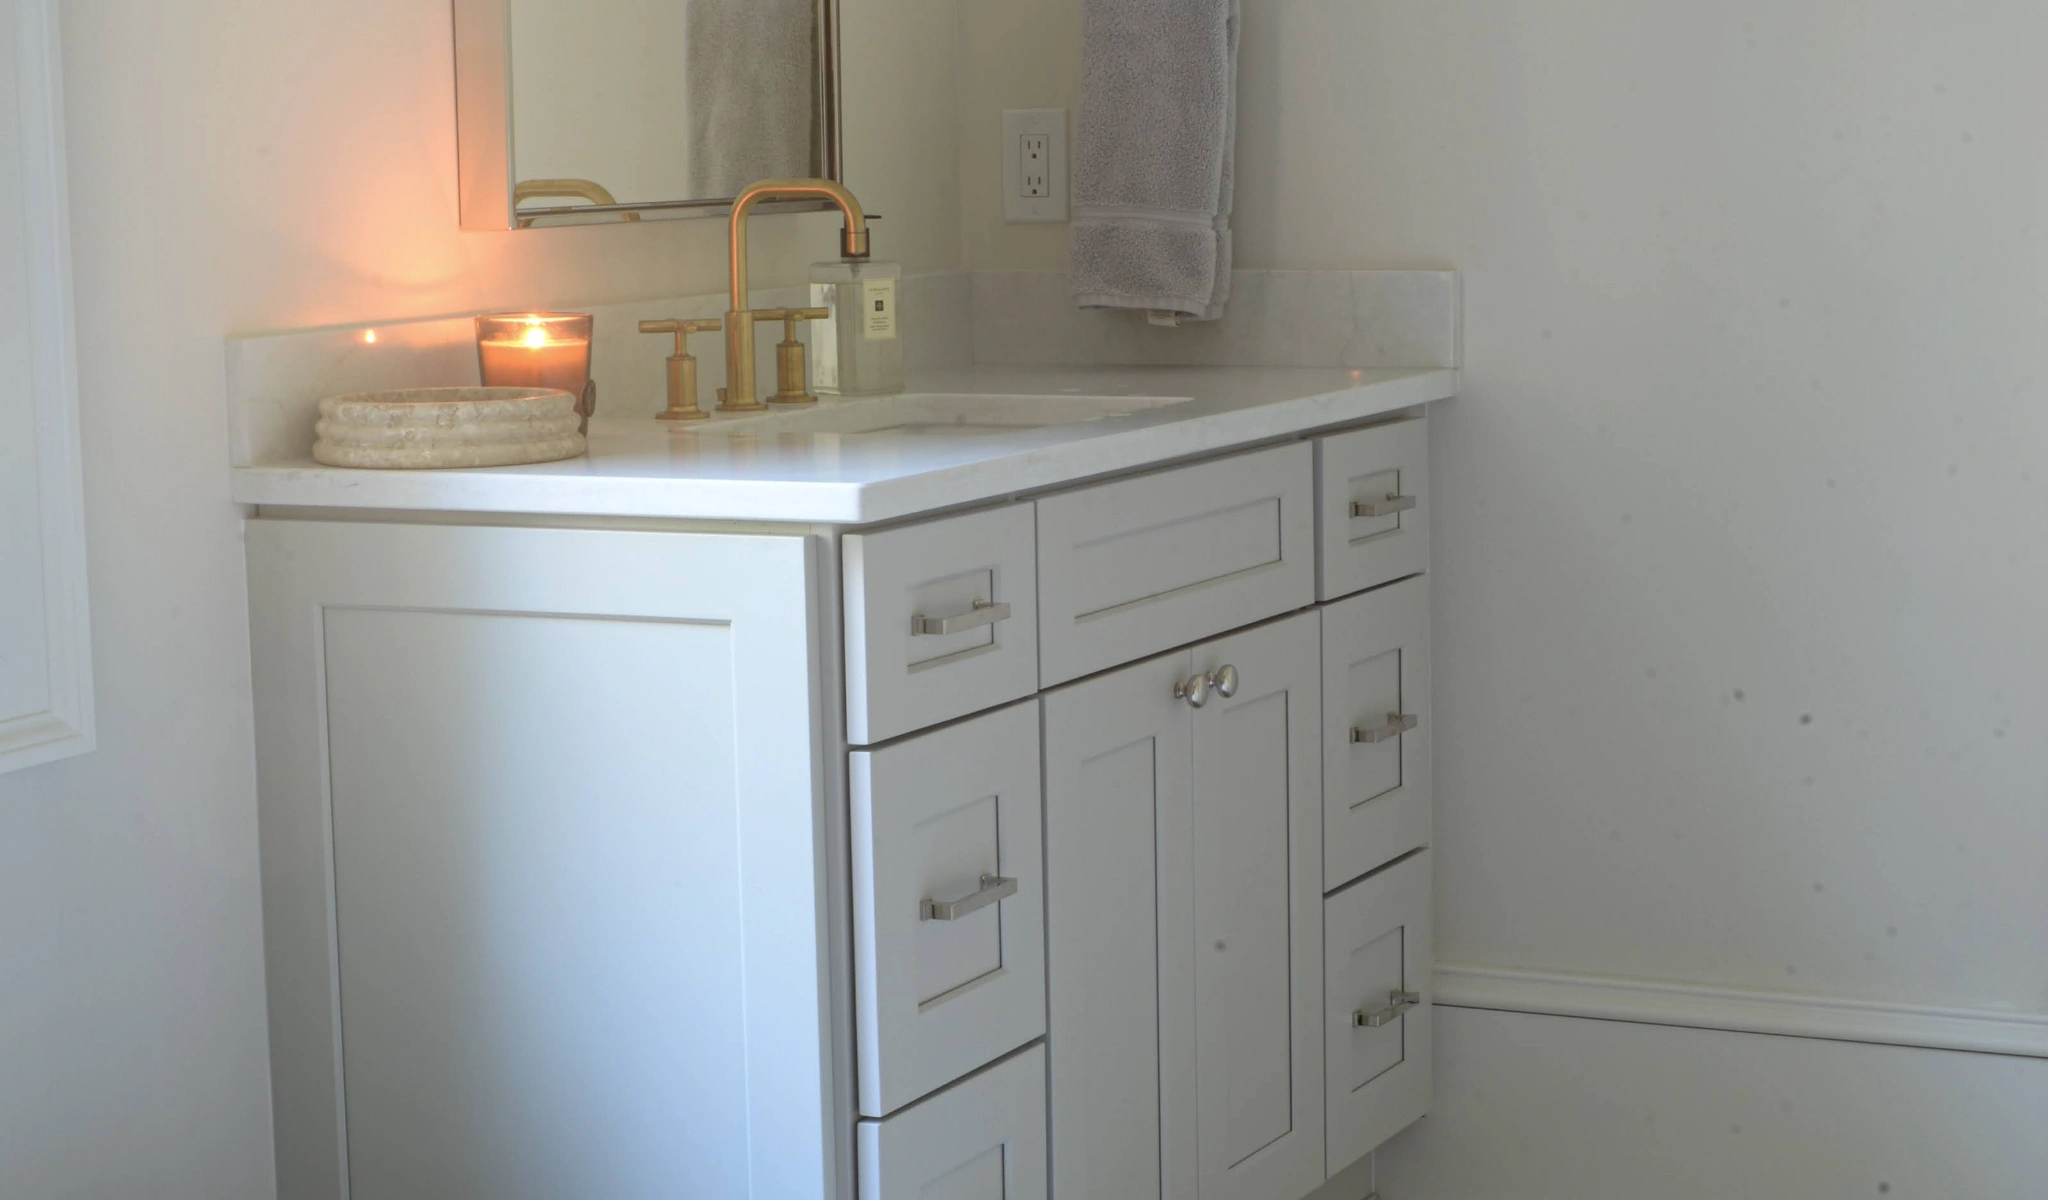 A white bathroom vanity with a candle.